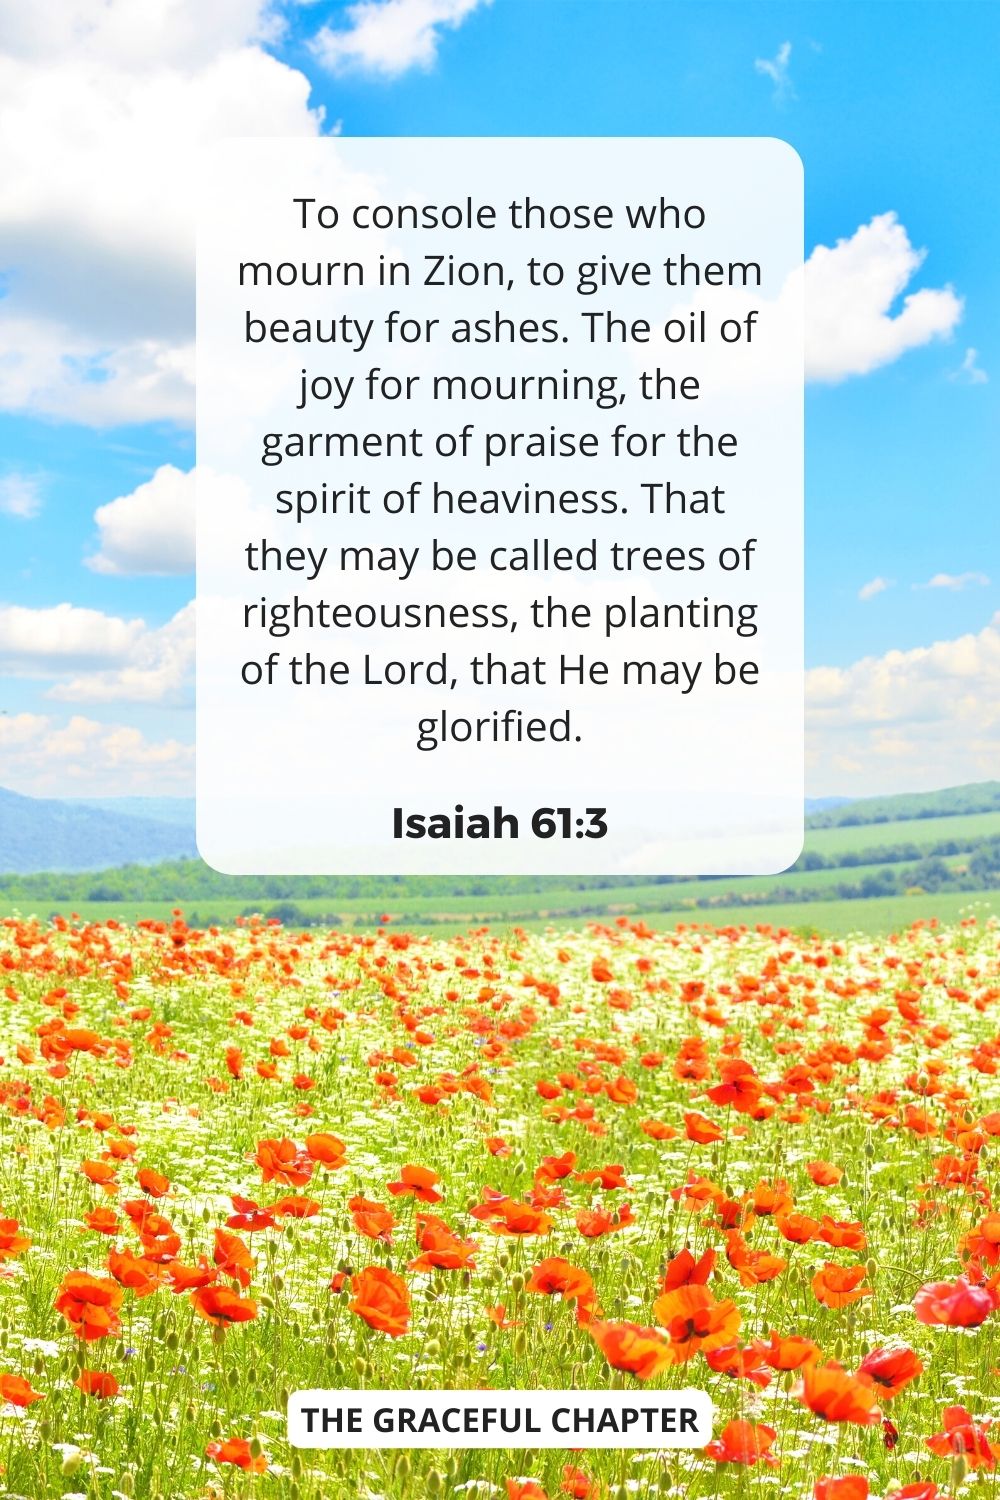 To console those who mourn in Zion, to give them beauty for ashes. The oil of joy for mourning, the garment of praise for the spirit of heaviness. That they may be called trees of righteousness, the planting of the Lord, that He may be glorified.